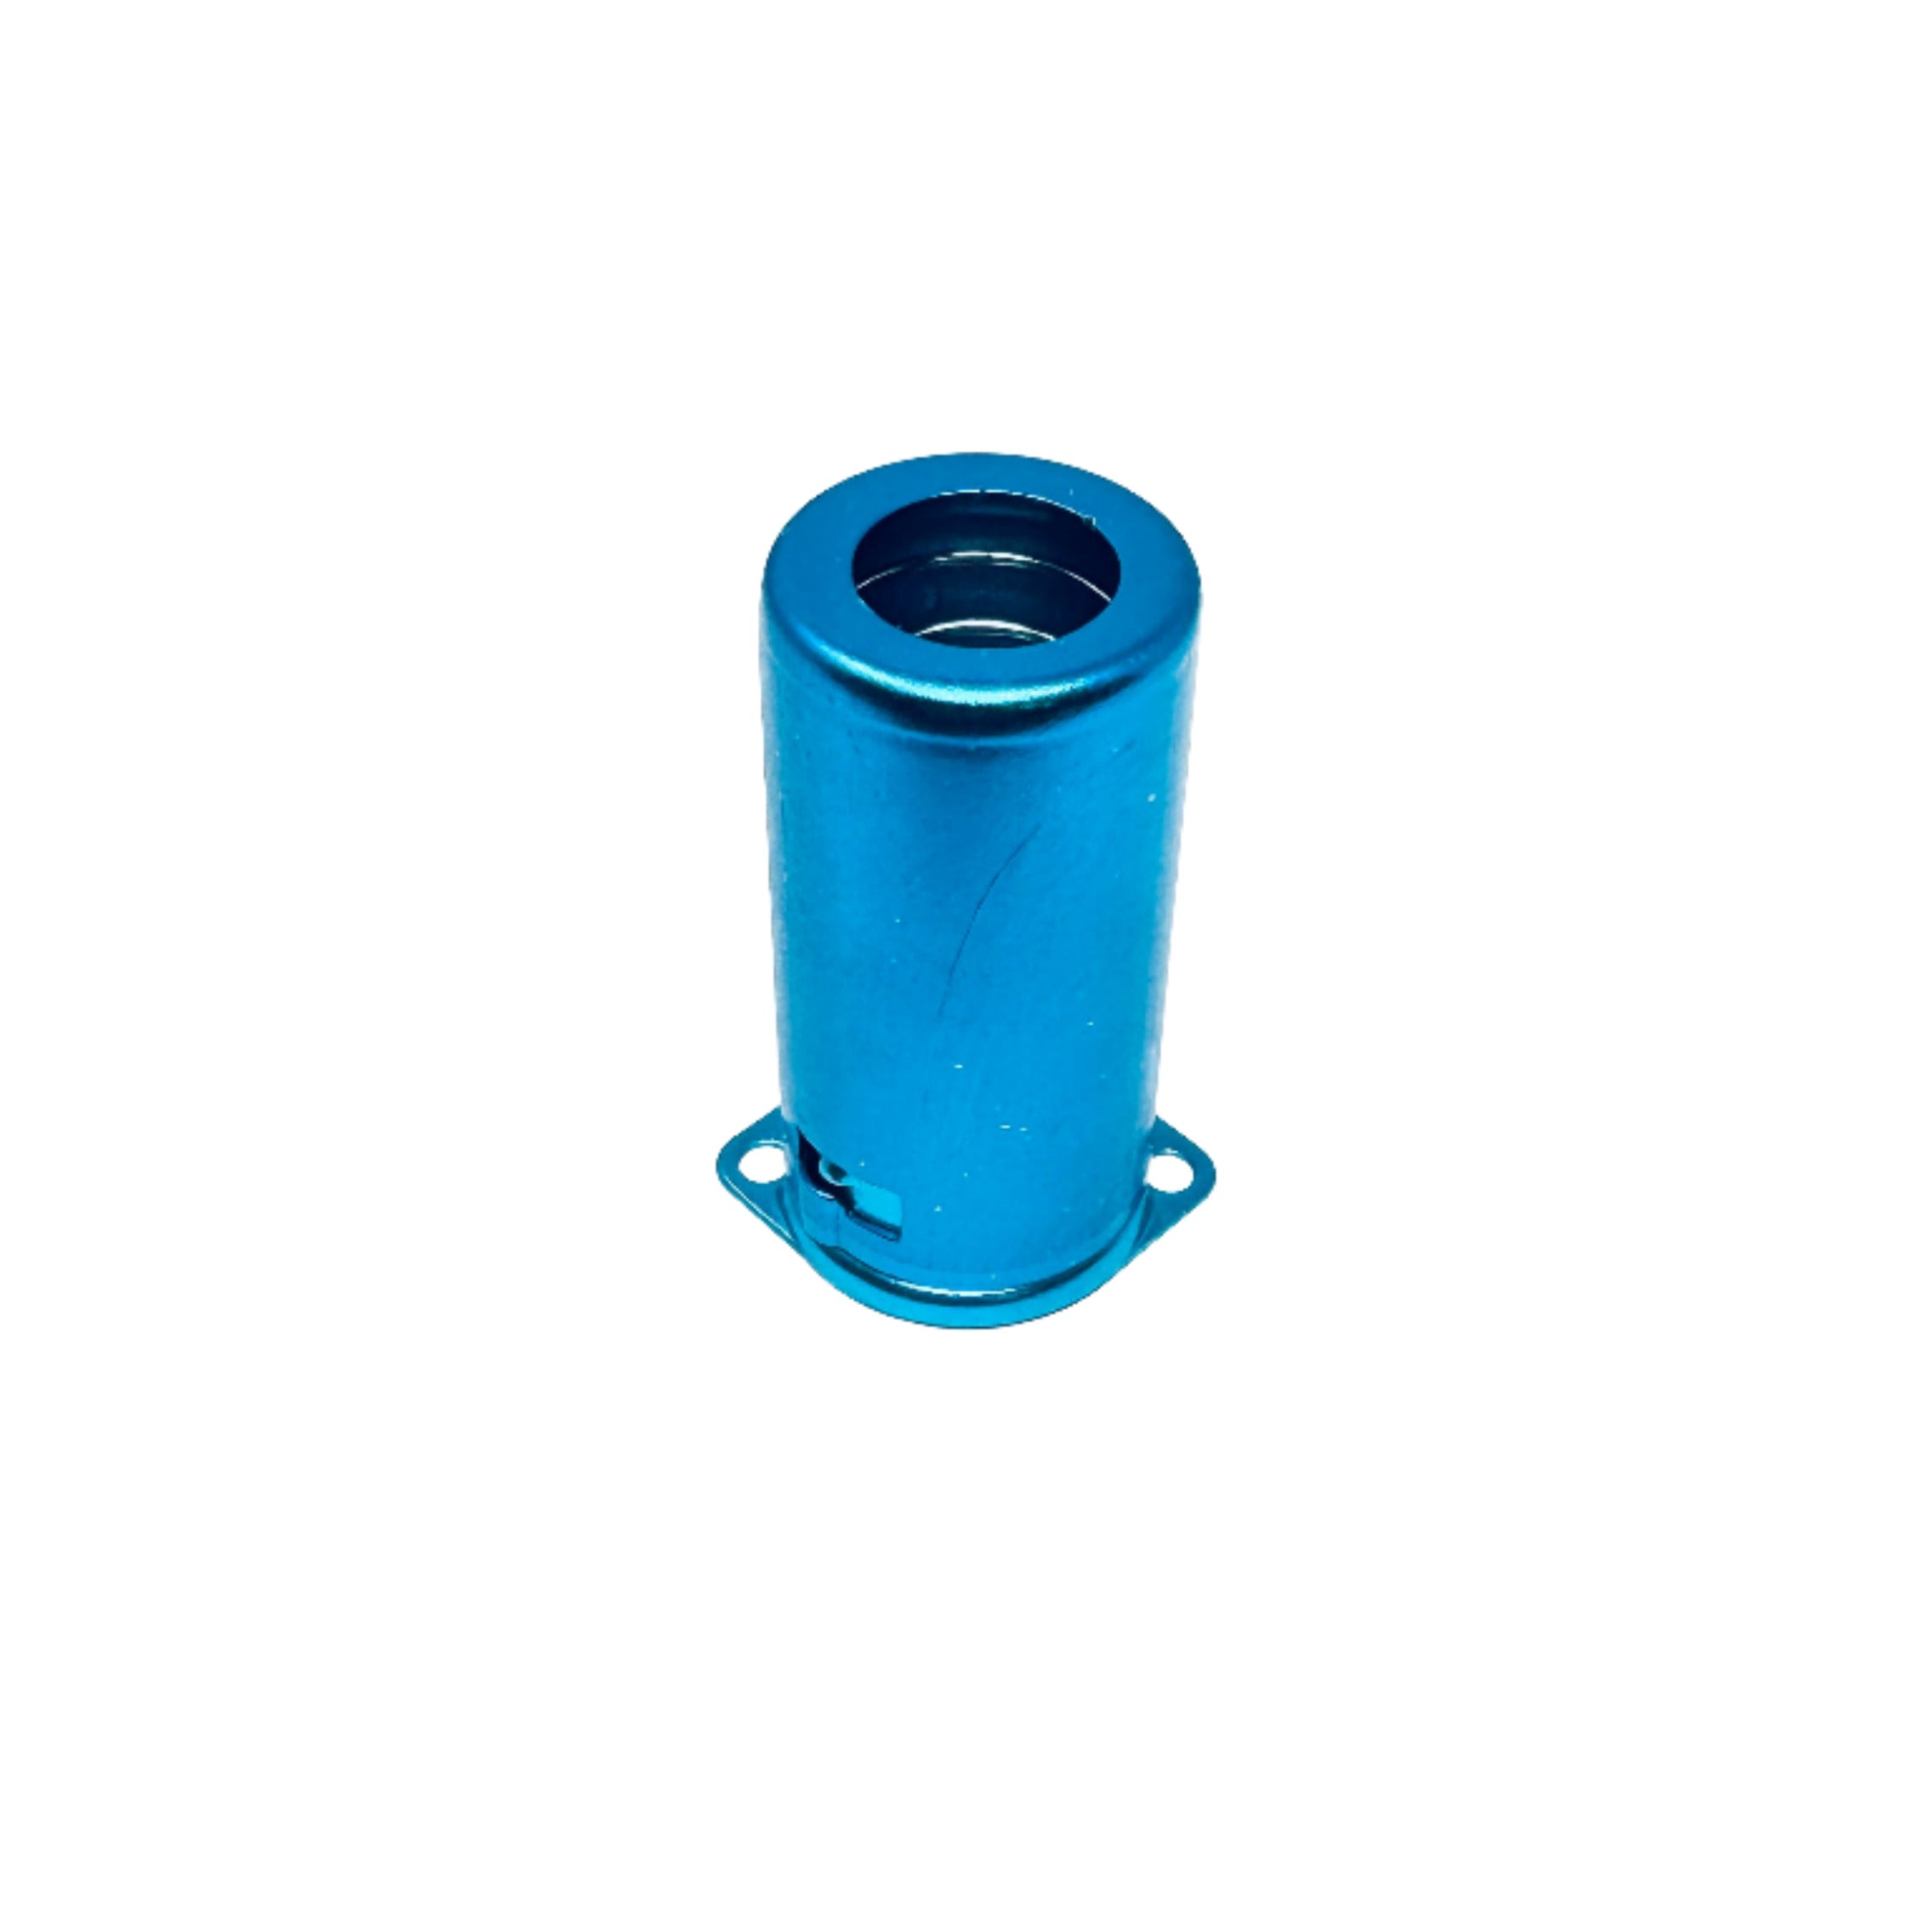 Blue Aluminum Tube Shield - 55mm Tall, tube shield for vacuum tubes, music amplifier parts